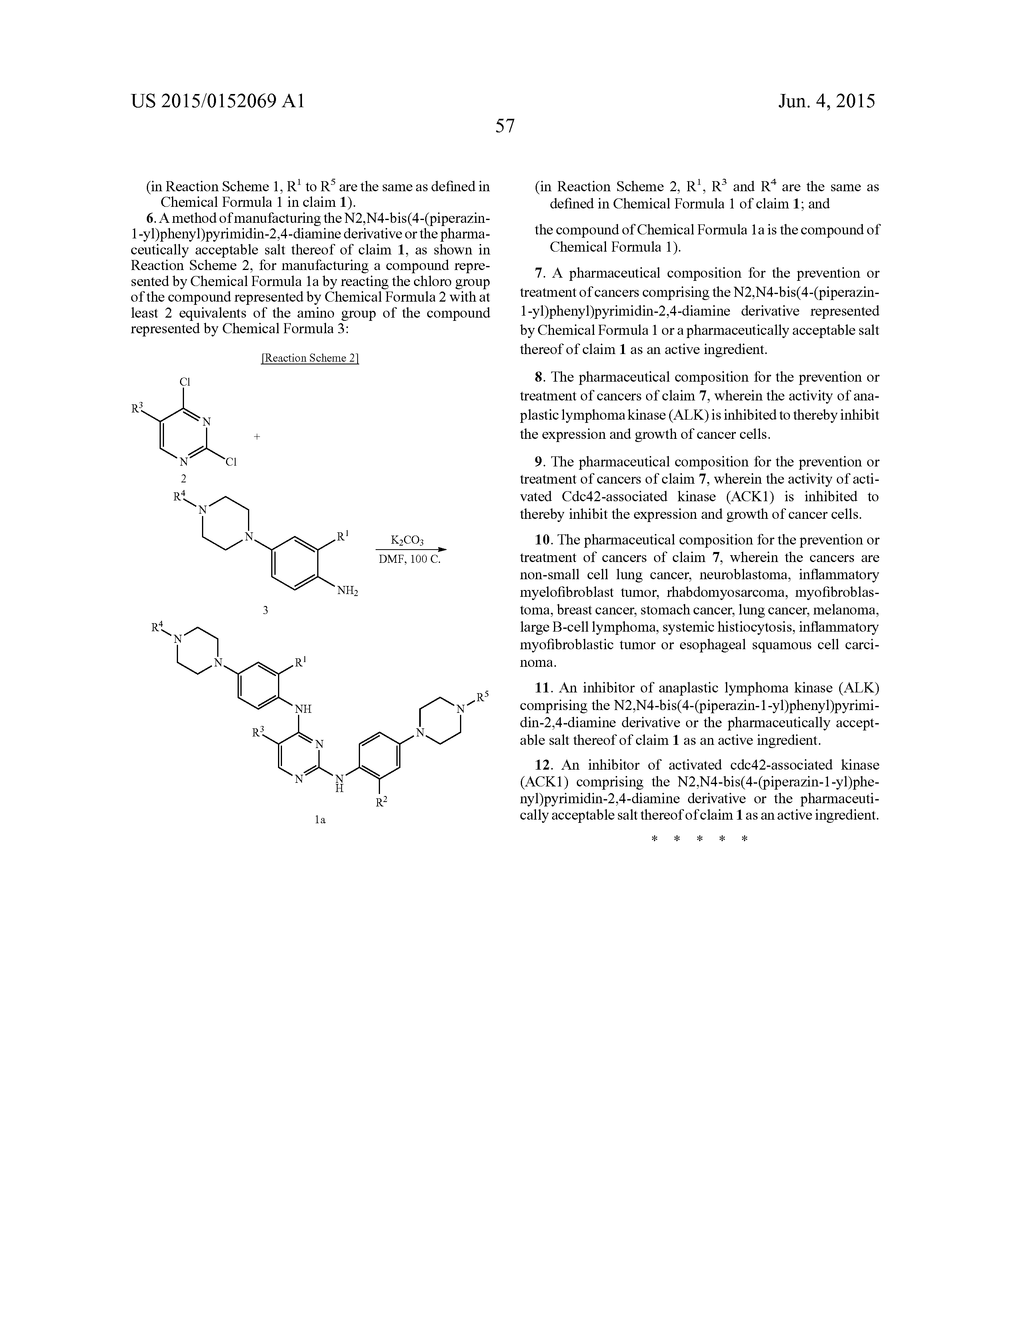 N2,N4-BIS(4-(PIPERAZINE-1-YL)PHENYL)PIRIMIDINE-2,4-DIAMINE DERIVATIVE OR     PHARMACEUTICALLY ACCEPTABLE SALT THEREOF, AND COMPOSITION CONTAINING SAME     AS ACTIVE INGREDIENT FOR PREVENTING OR TREATING CANCER - diagram, schematic, and image 61